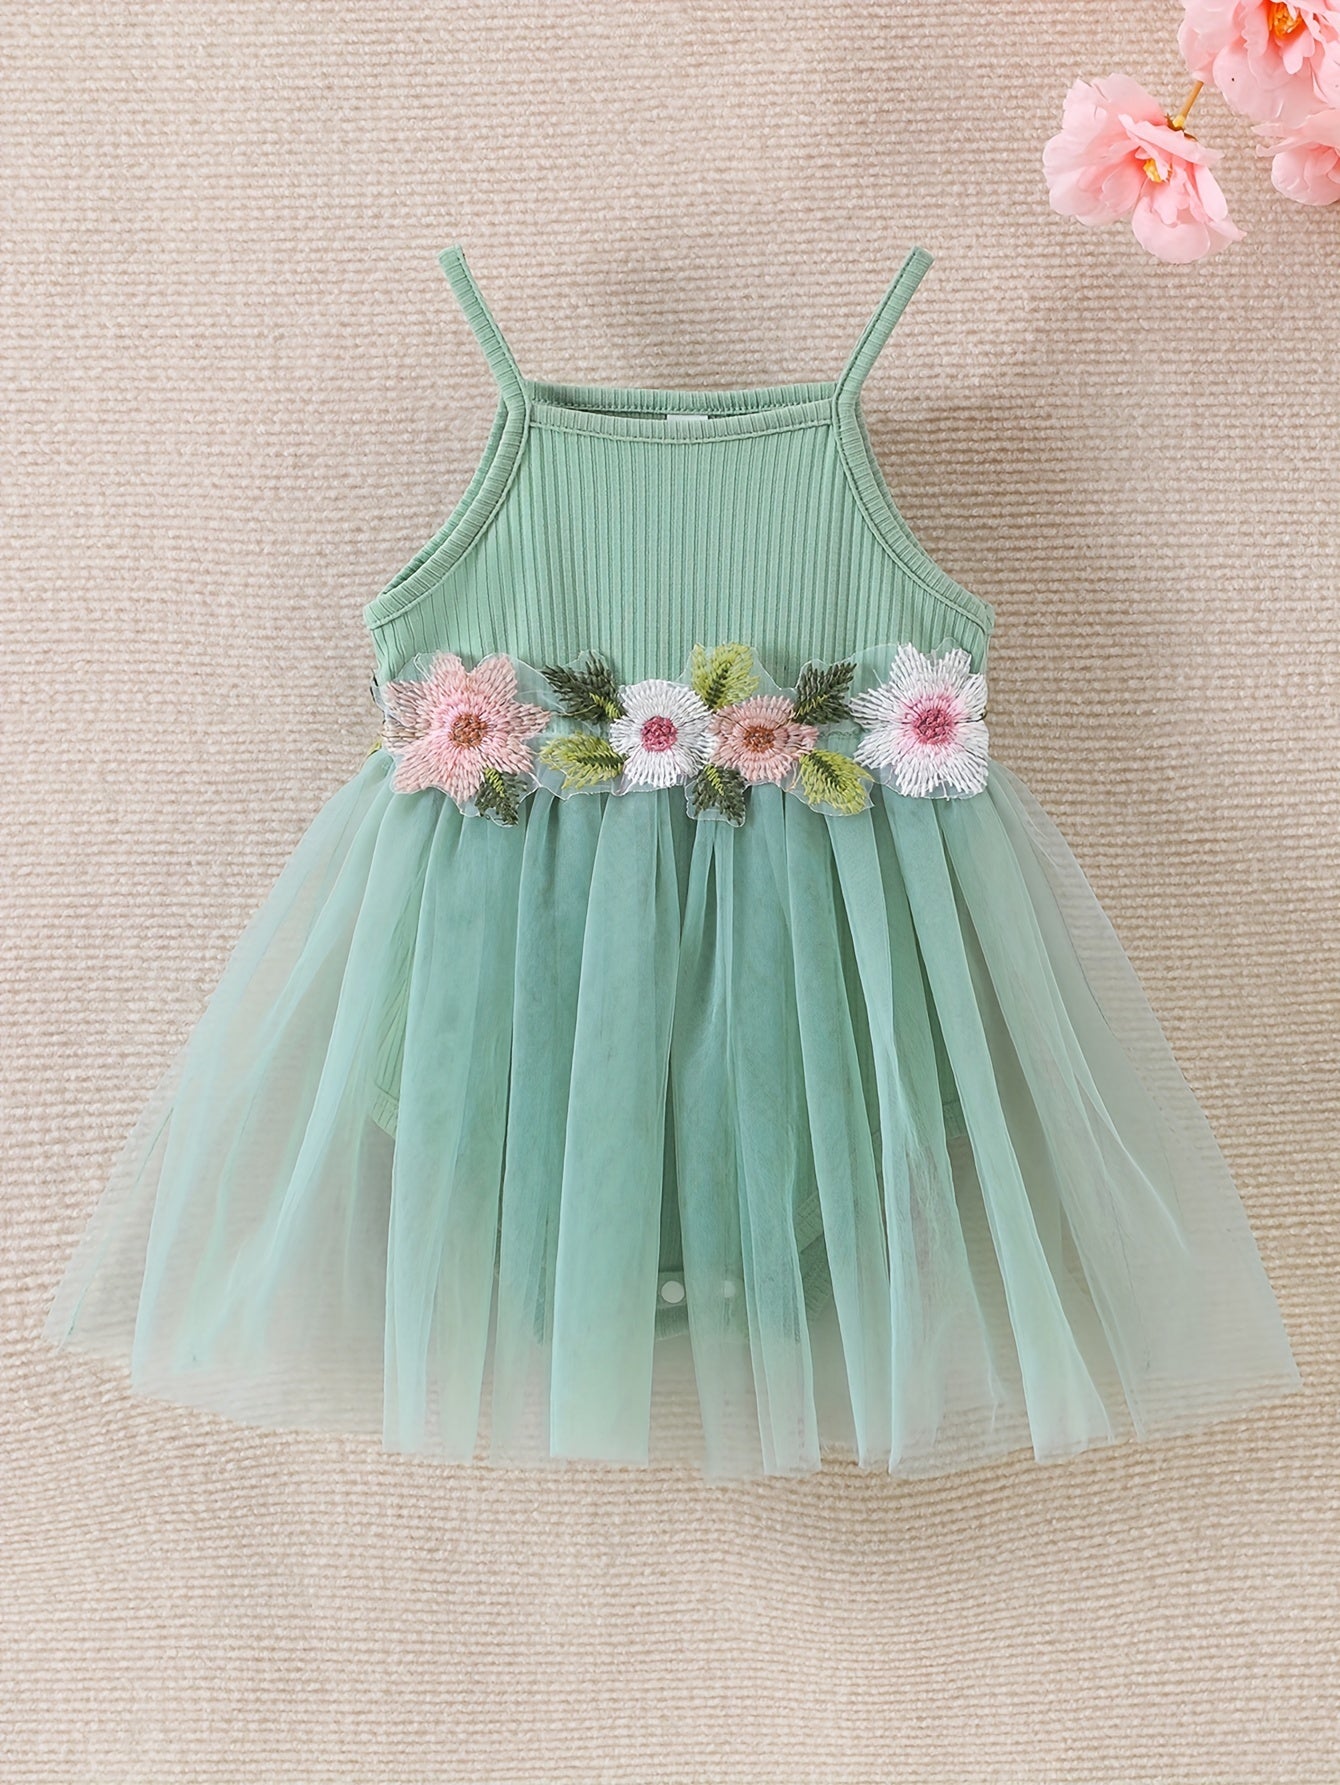 Baby Girl's Cute Floral Embroidery Sleeveless Mesh Cami Onesie Dress Clothes With Fashion Mesh Hem And Flower Decors